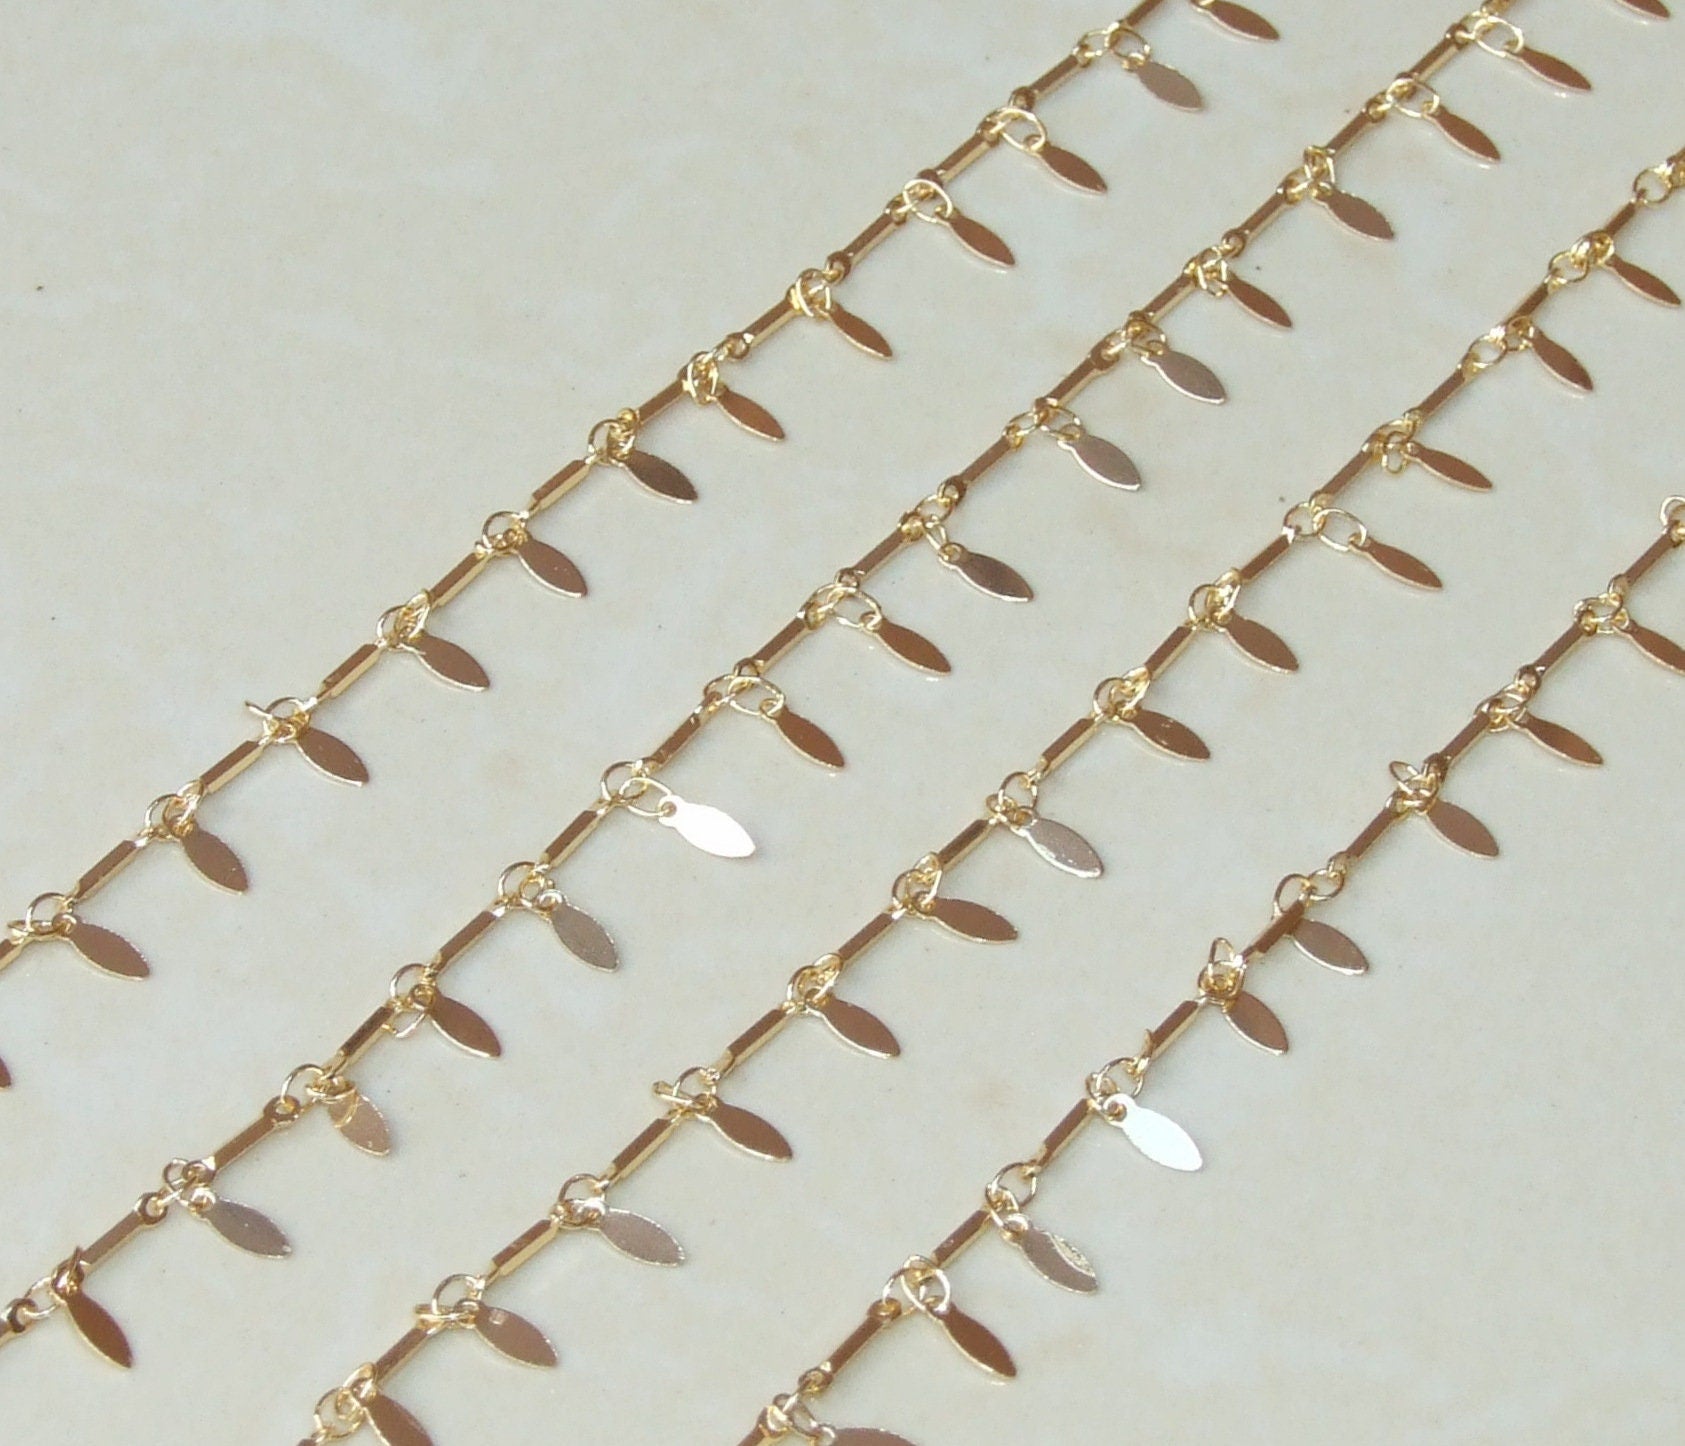 Gold Plated Teardrop Chain, Drop Chain, Gold Chain Wholesale, Bar Link Chain, Rosary Chain, Belly Chain, Body Chain, Jewelry Chain, By Meter